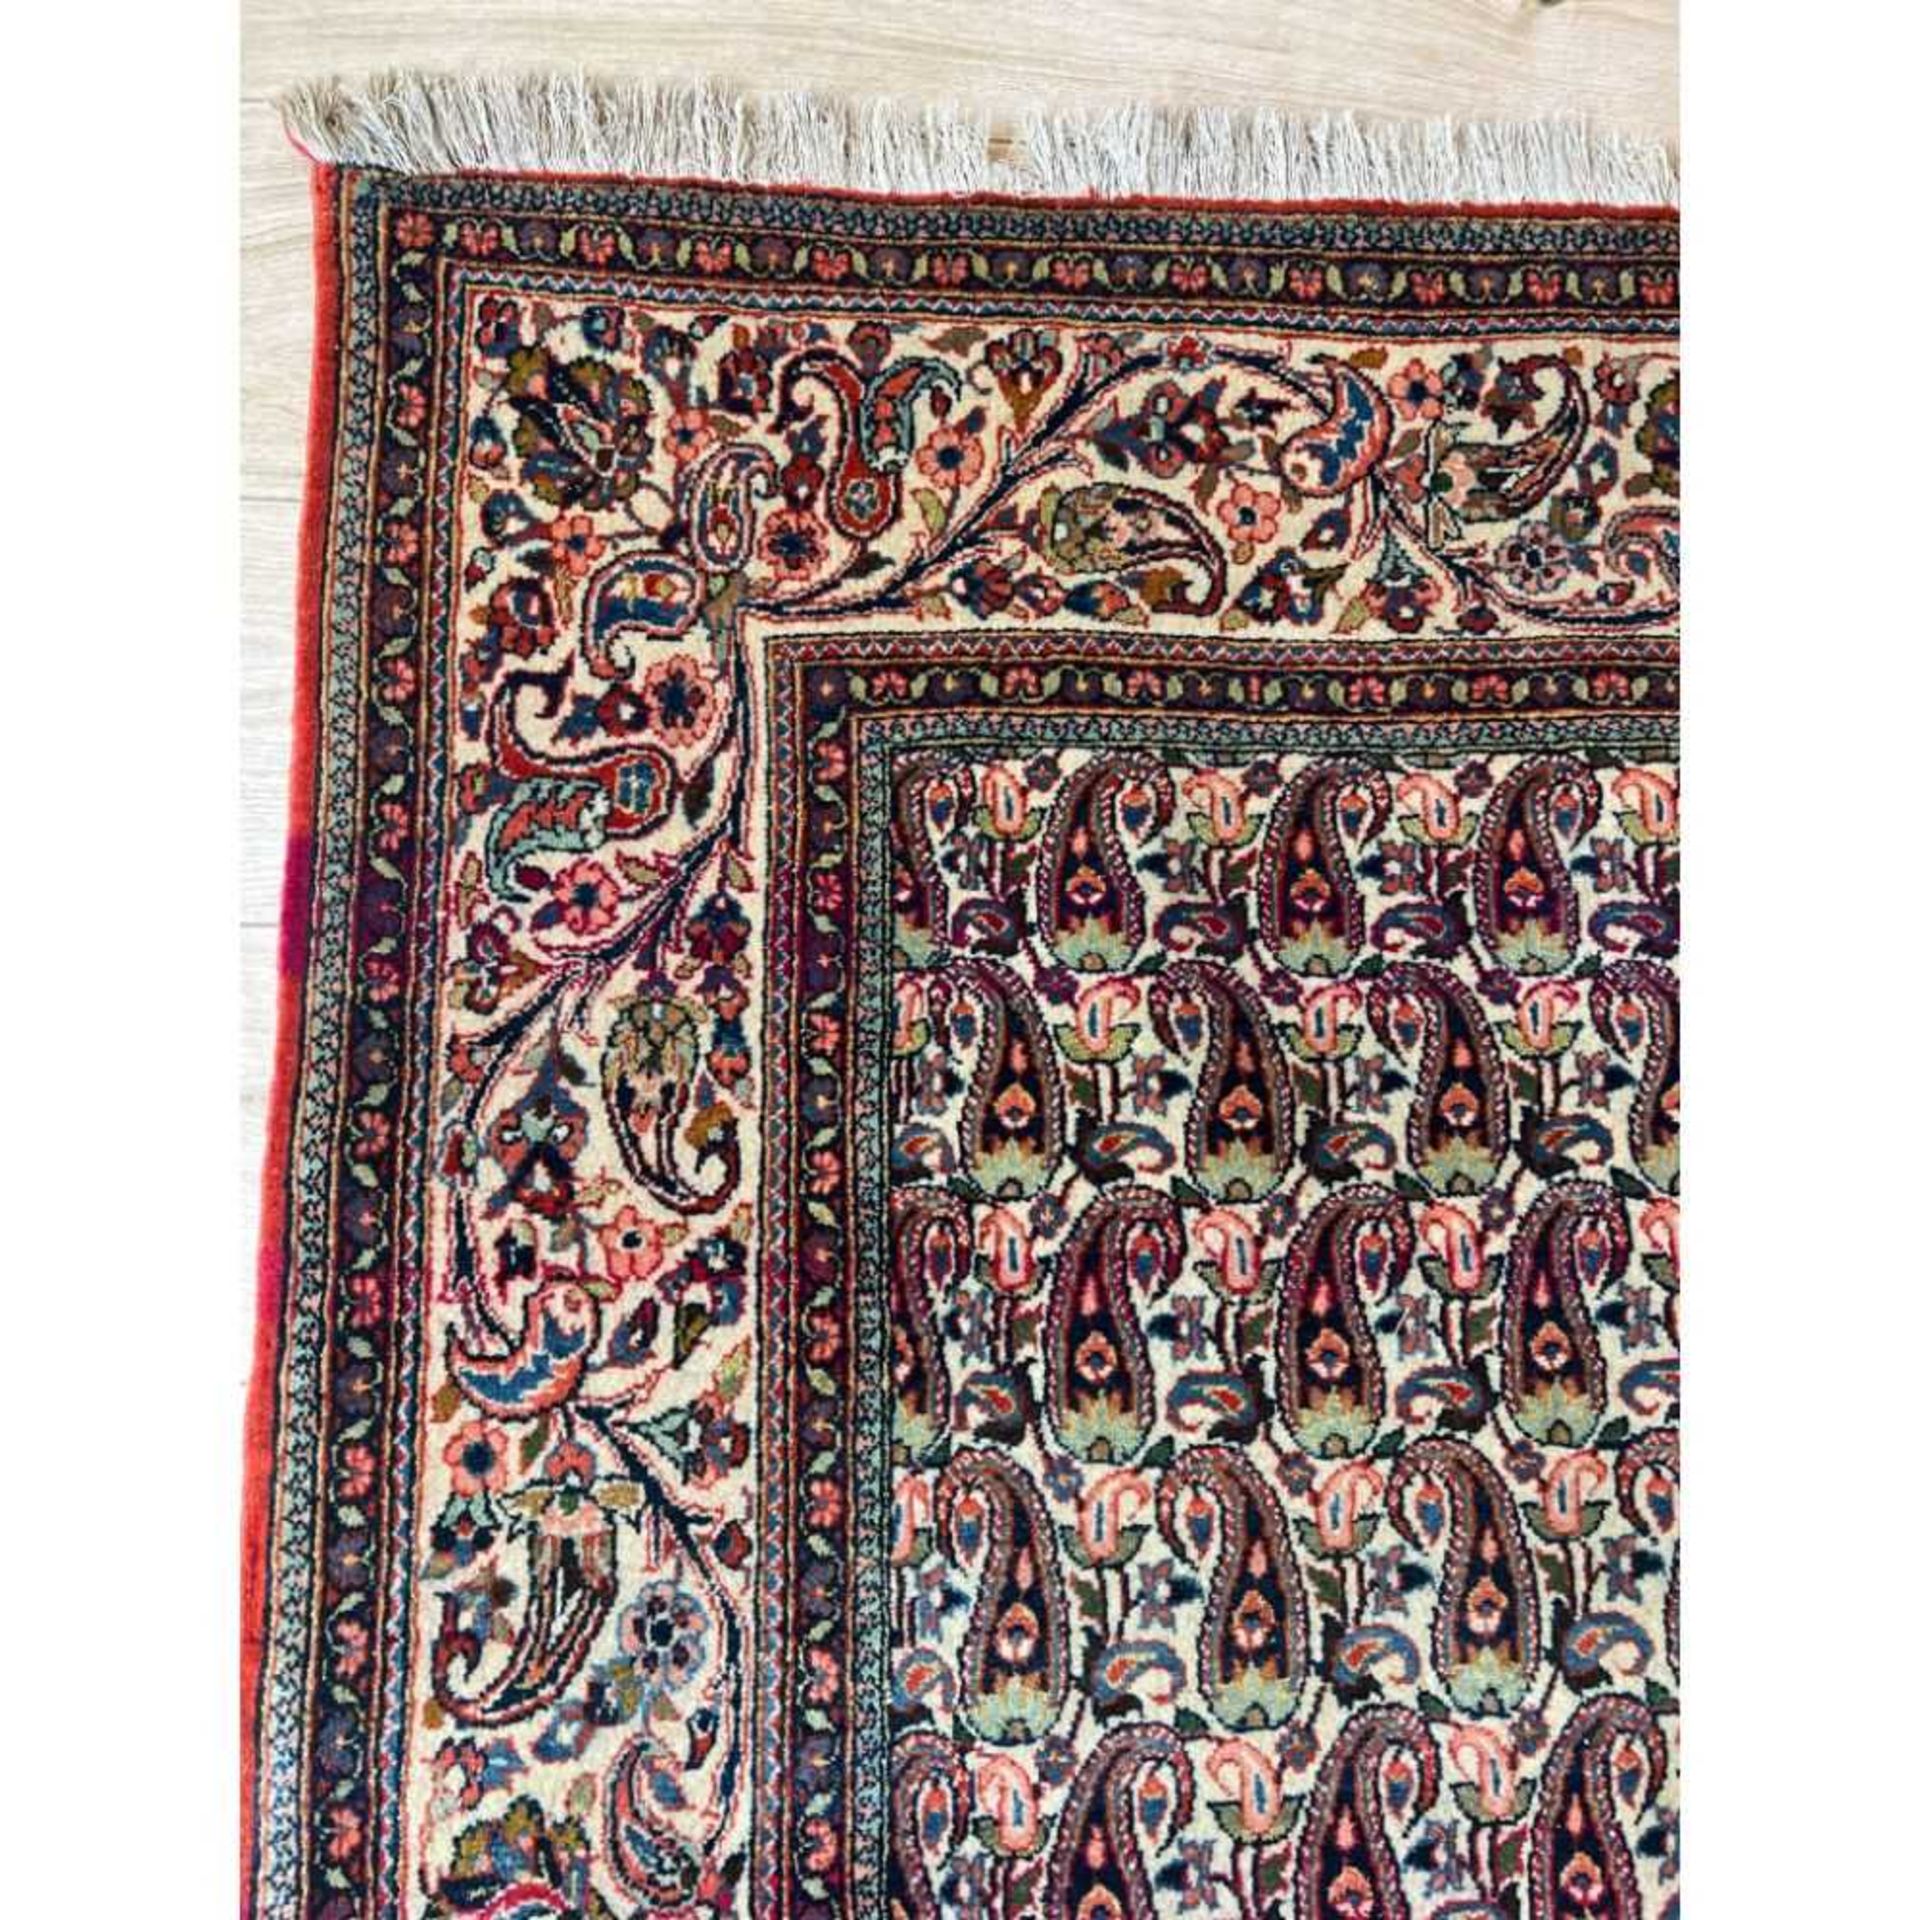 A MID 20TH CENTURY KASHAN CARPET - Image 3 of 6